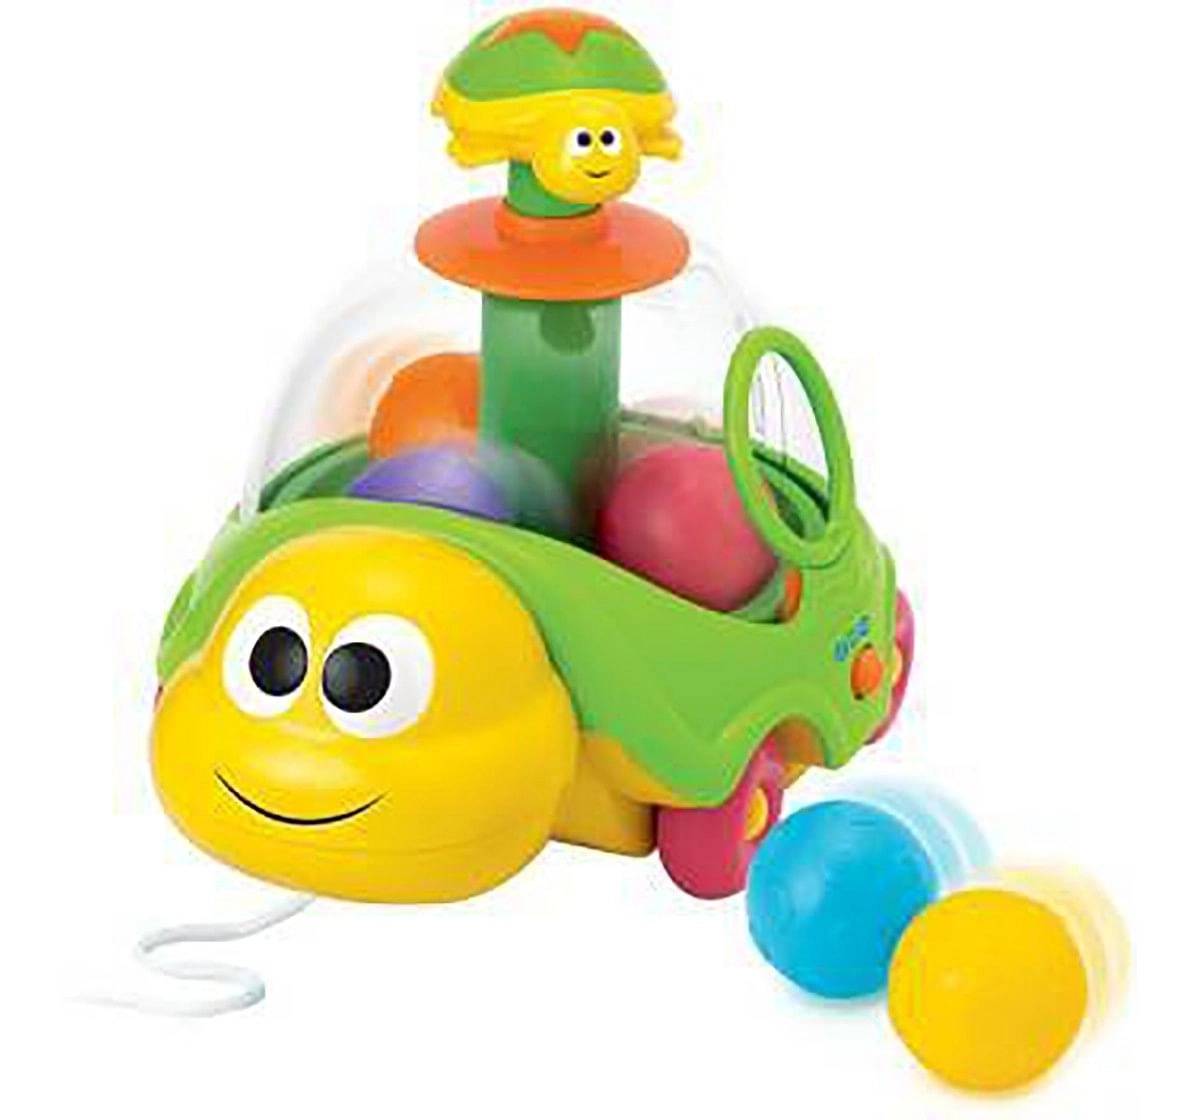 Winfun - Spin 'N Pull Snail Early Learner Toys for Kids age 12M+ 